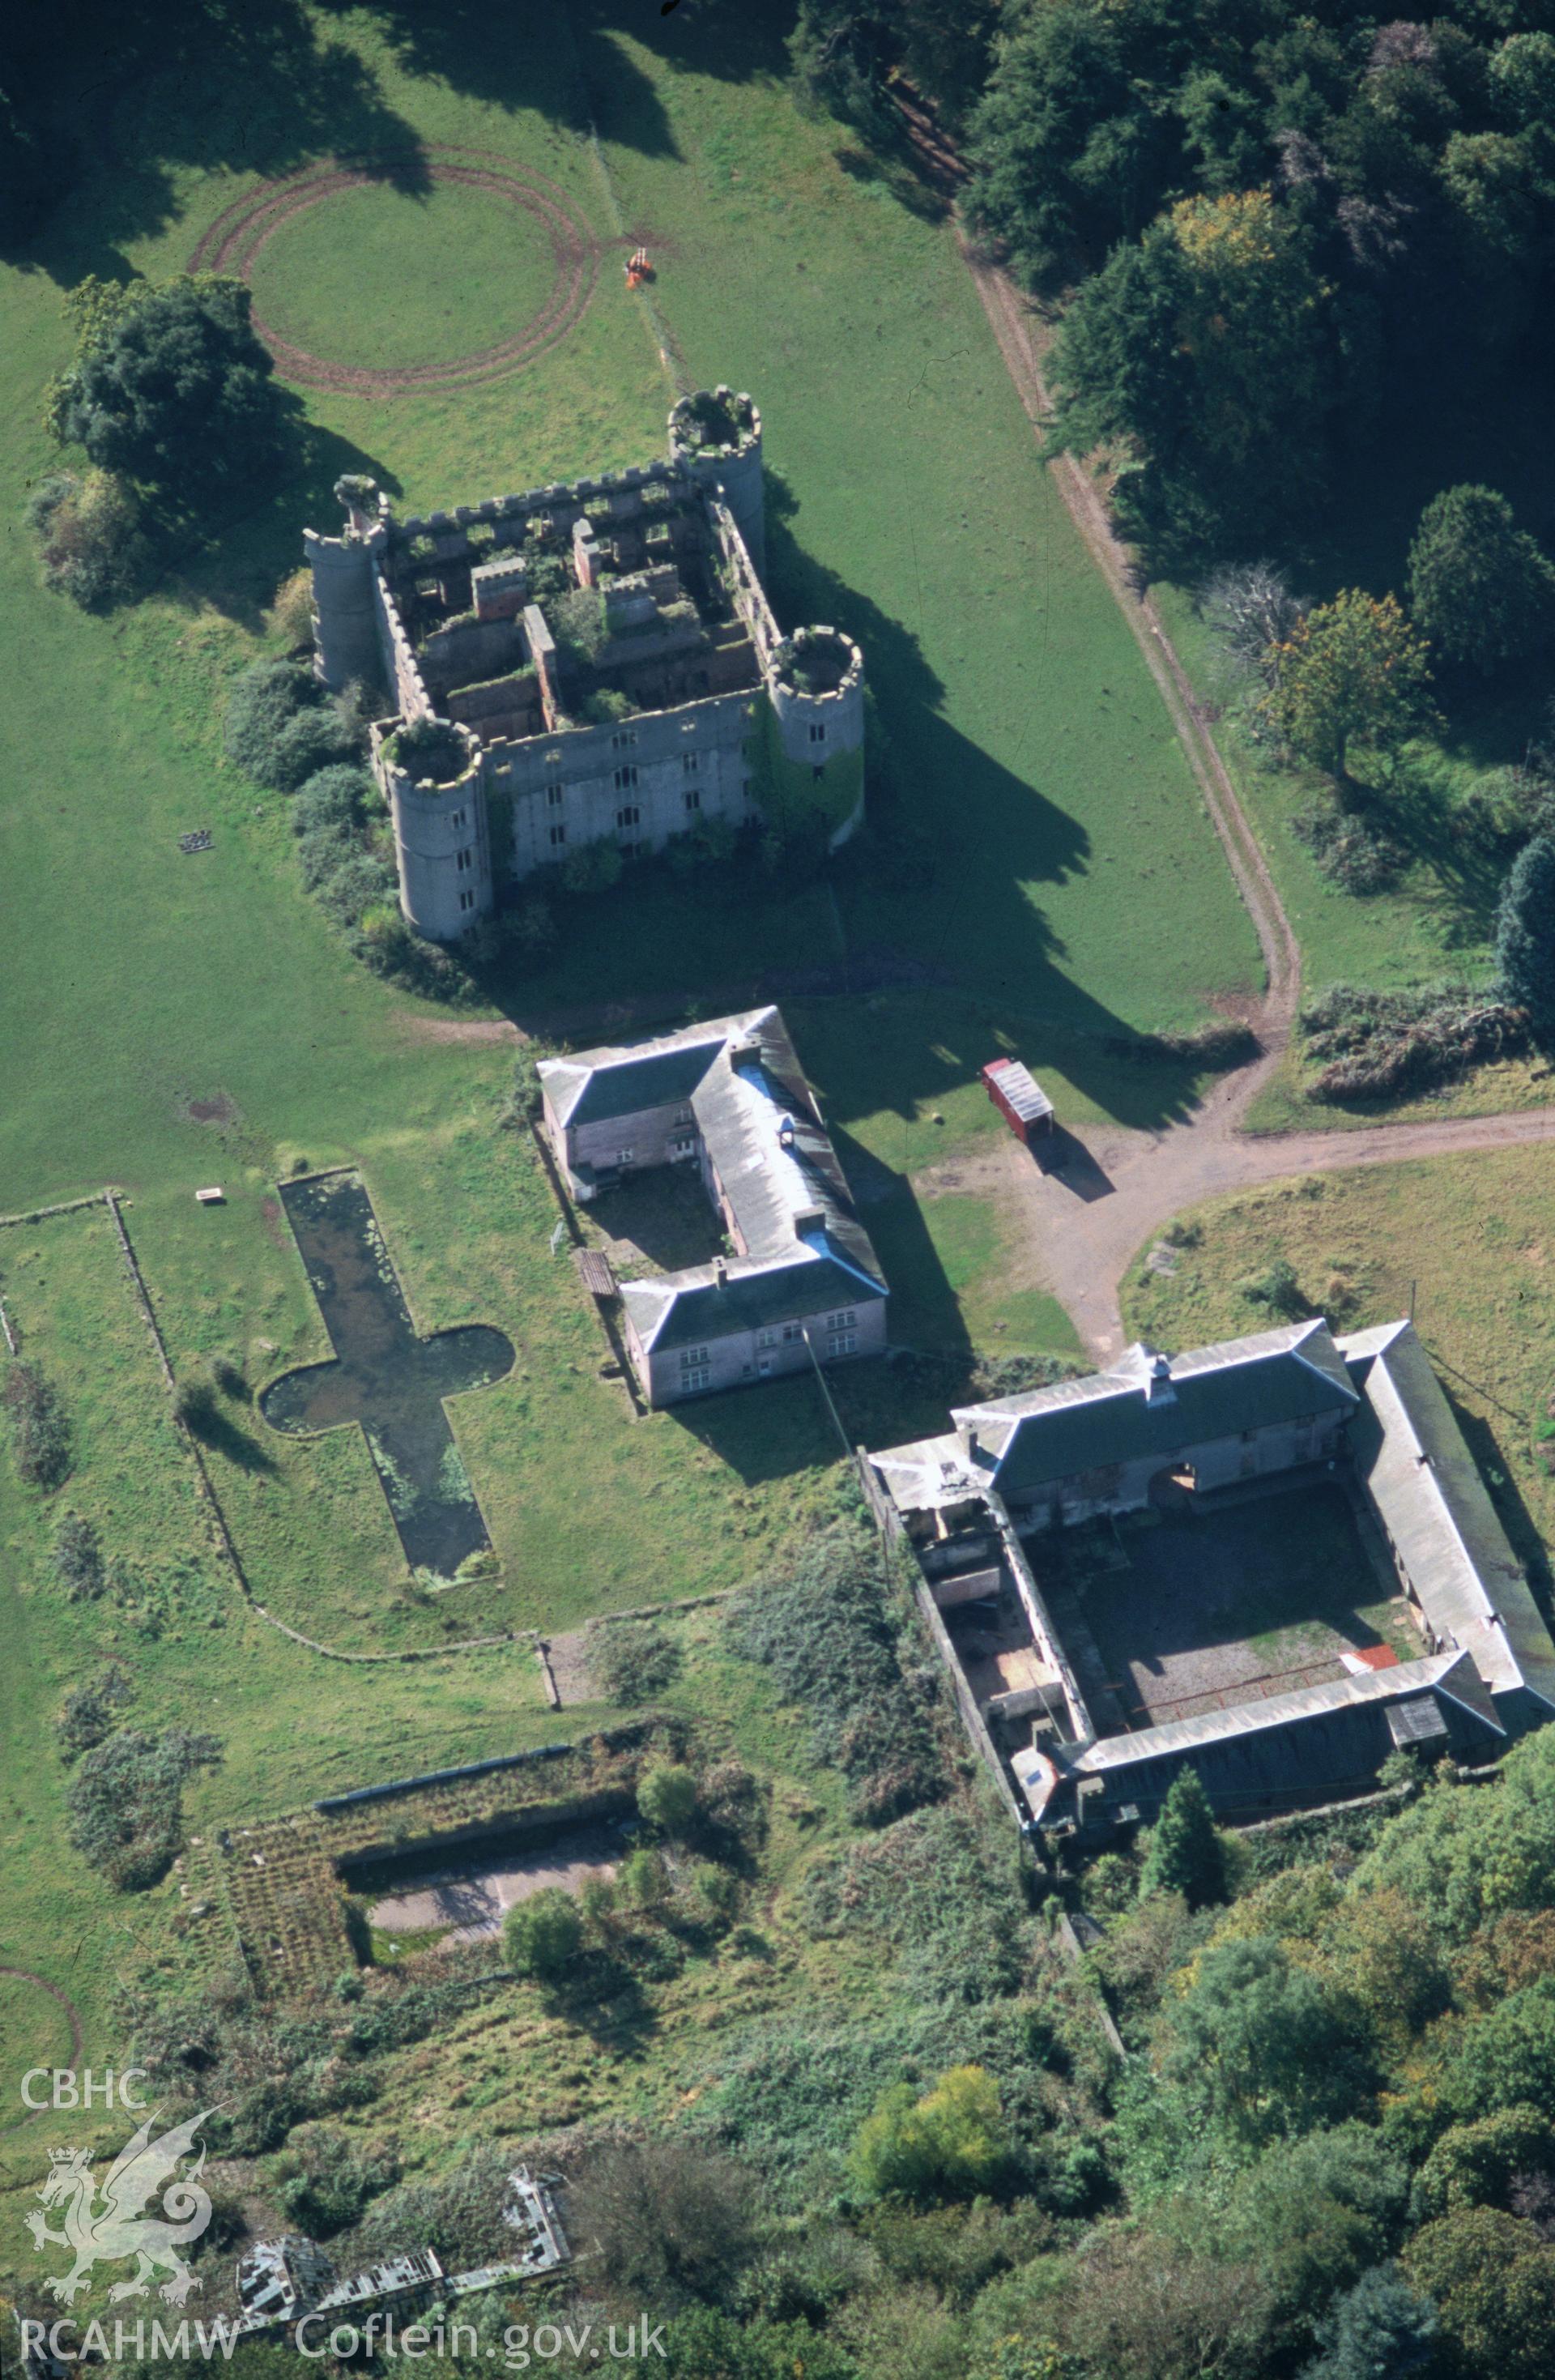 Slide of RCAHMW colour oblique aerial photograph of Ruperra Castle;rhiwperra, taken by T.G. Driver, 13/10/1999.